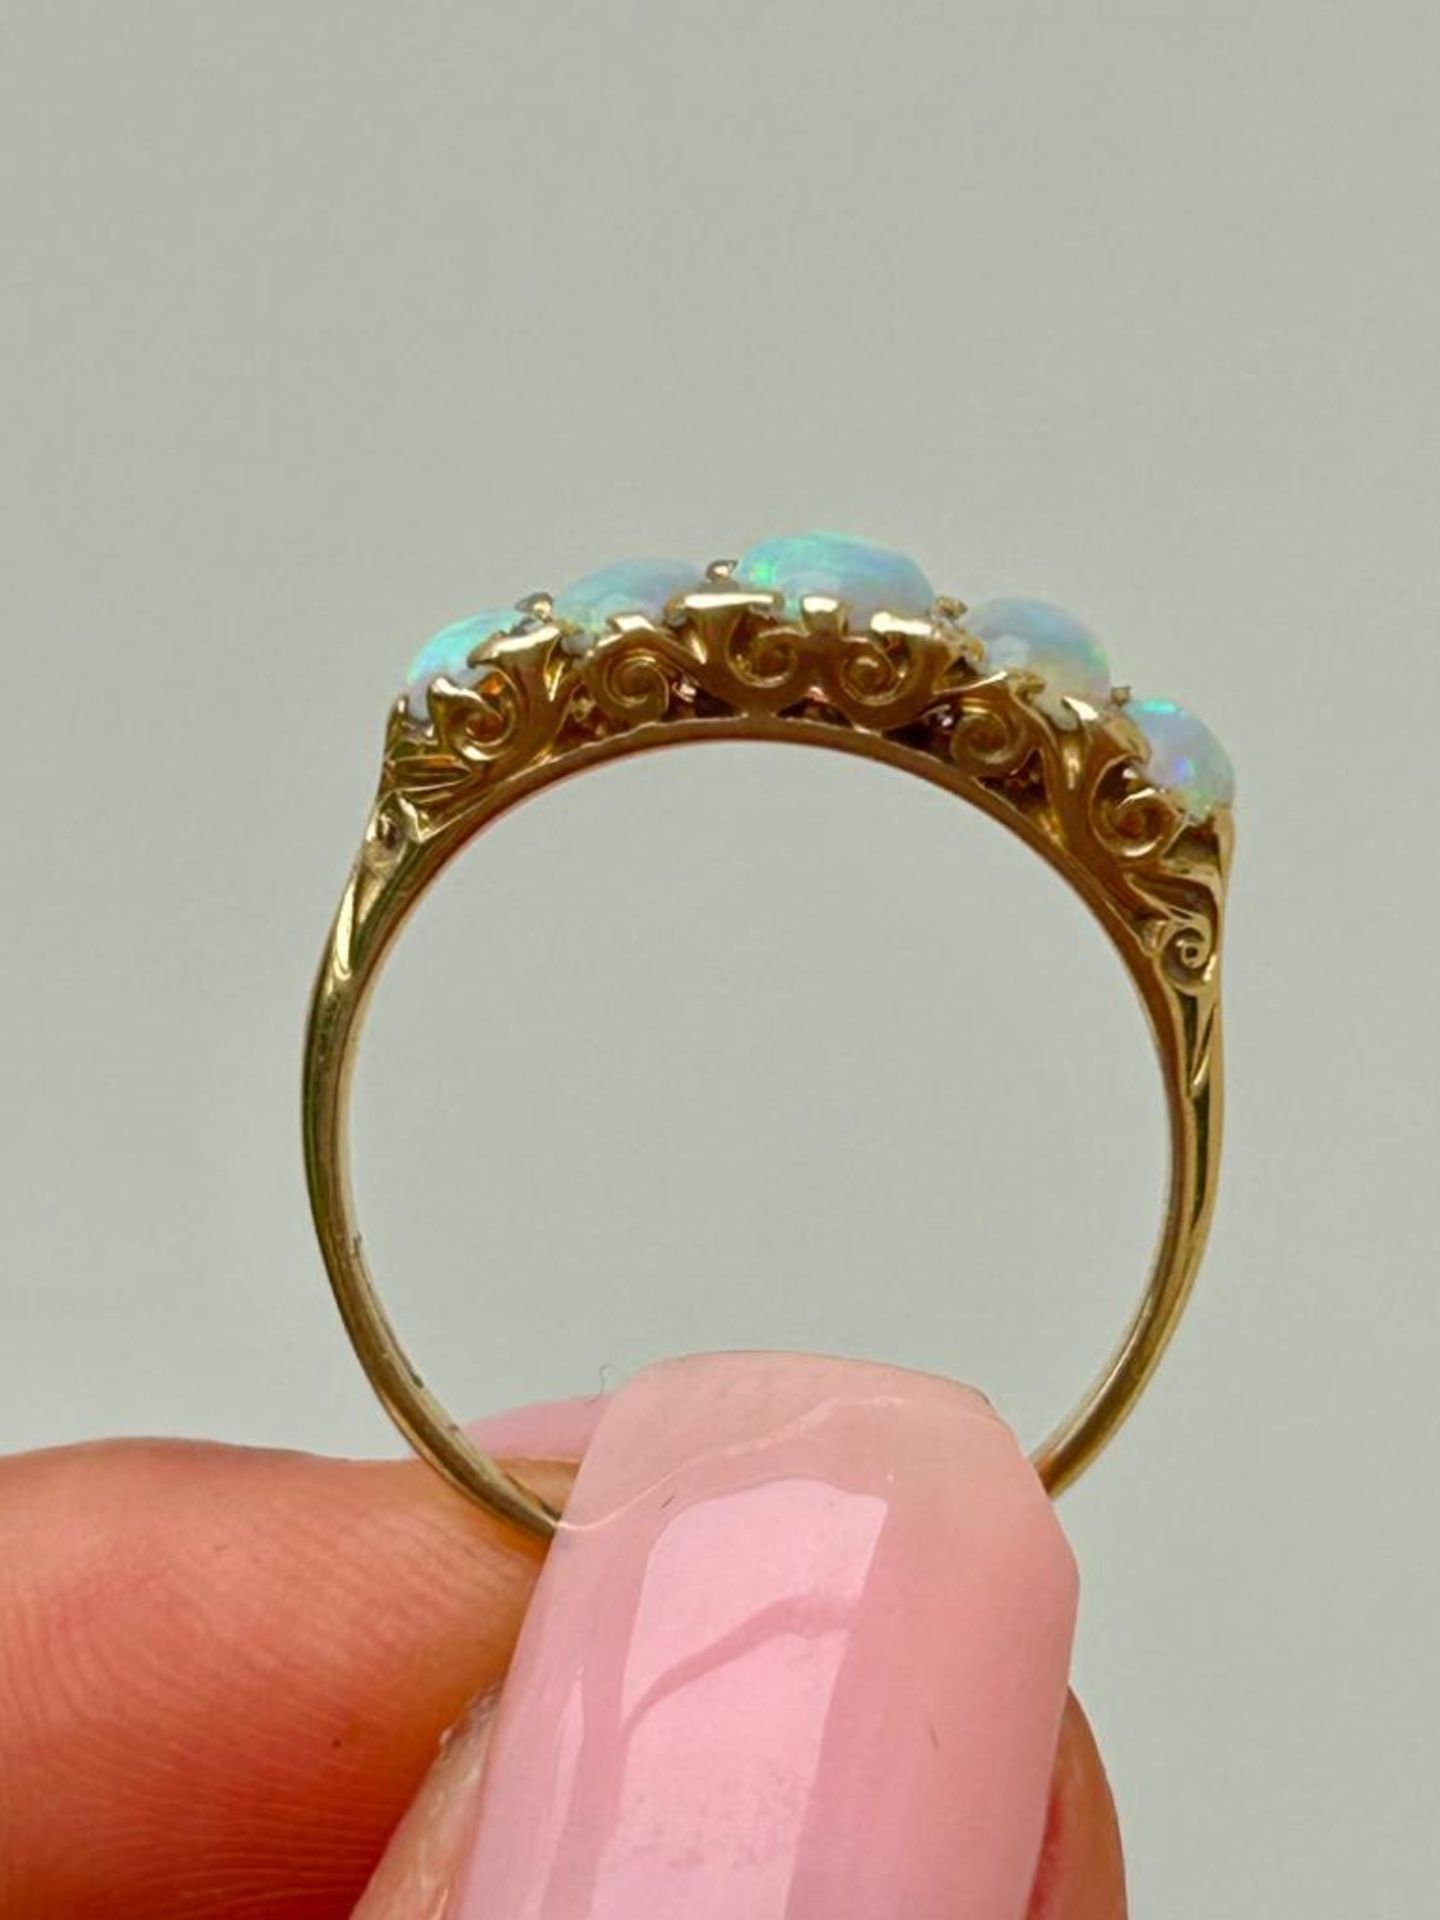 Antique 18ct Yellow Gold Scroll Gallery Opal and Diamond 5 Stone Ring - Image 5 of 6